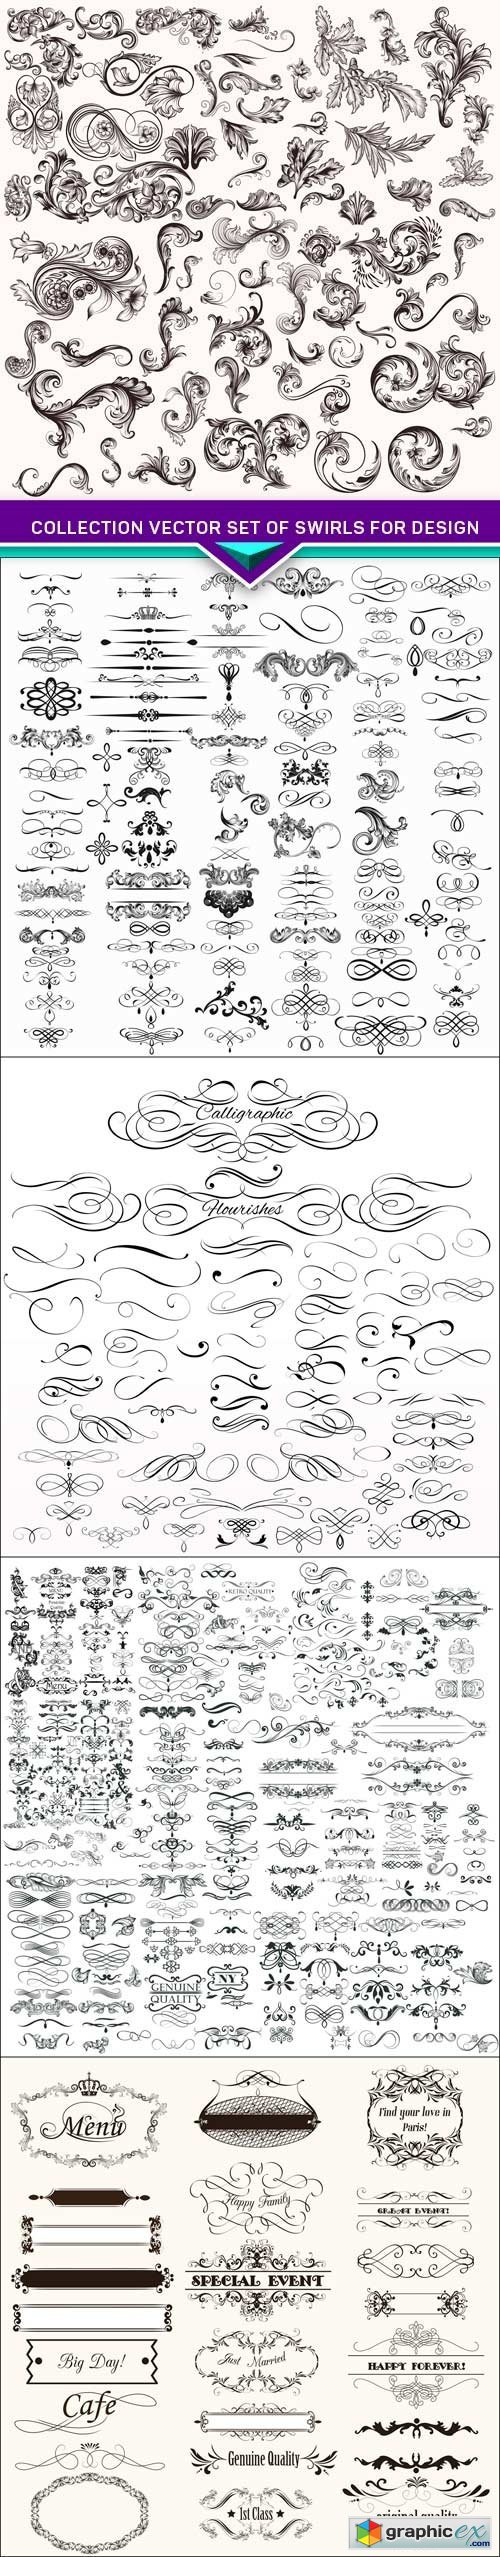 Collection vector set of swirls for design 5X EPS